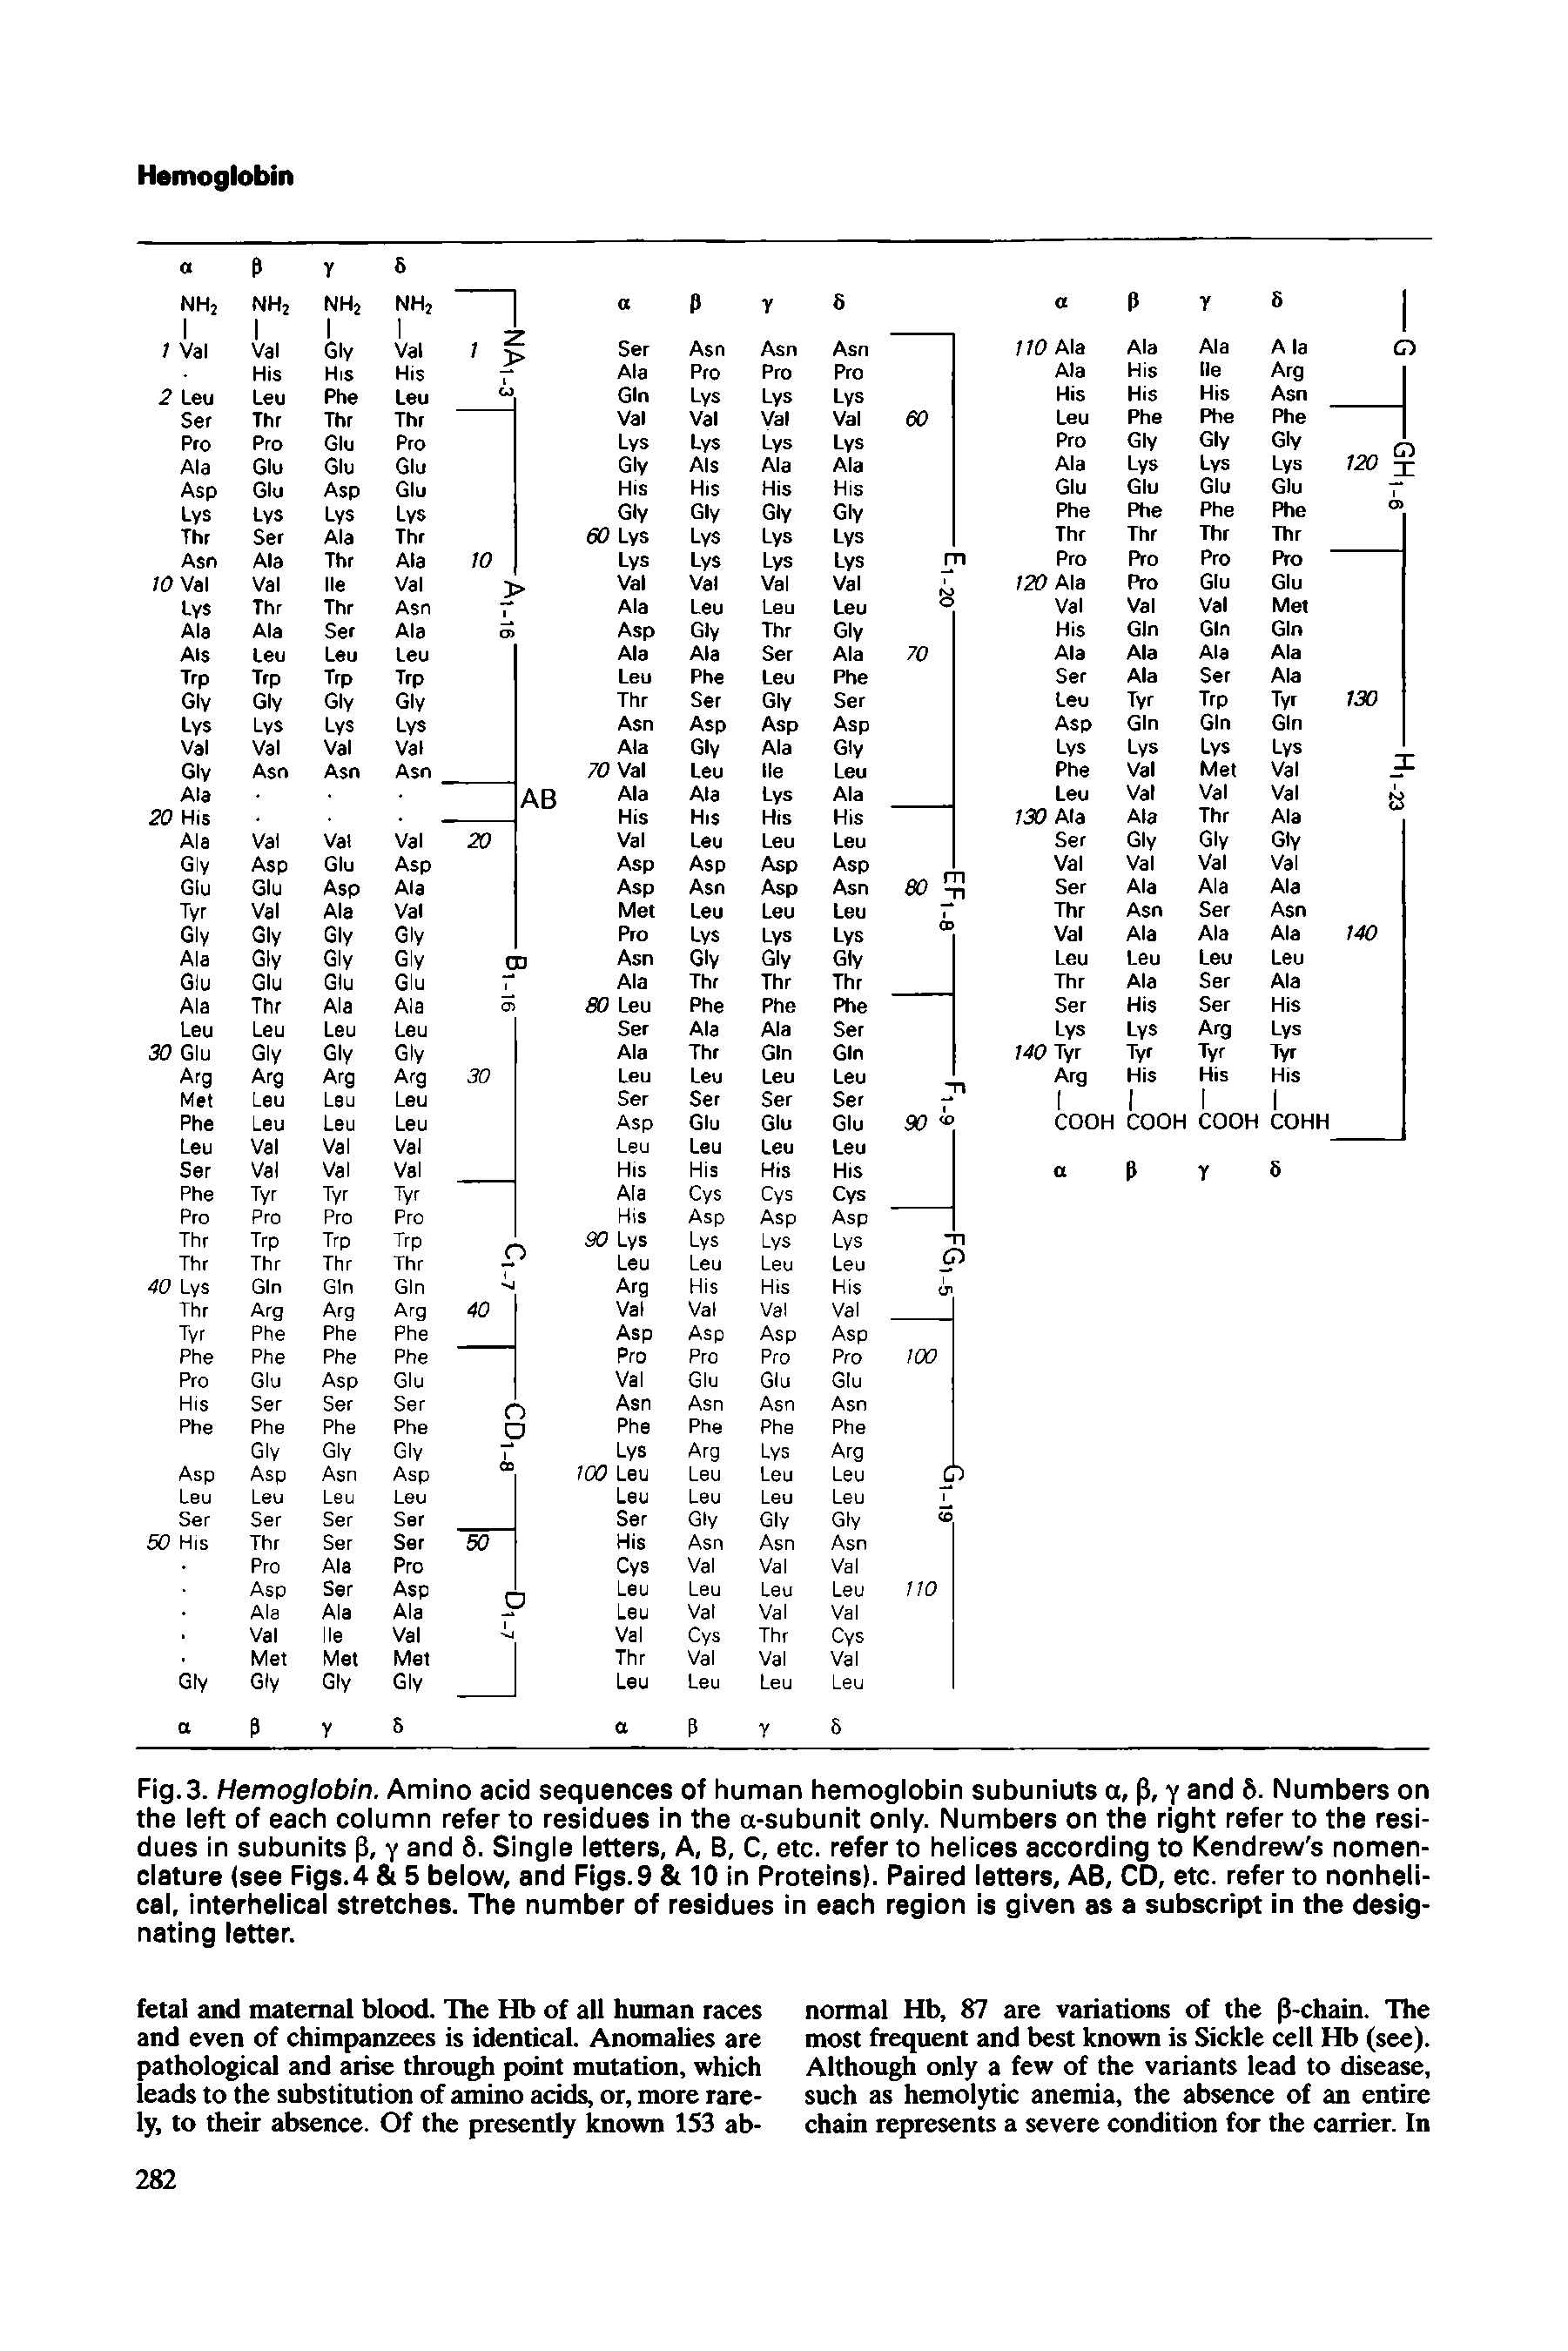 Fig. 3. Hemoglobin. Amino acid sequences of human hemoglobin subuniuts a, y and 6. Numbers on the left of each column refer to residues in the a-subunit only. Numbers on the right refer to the residues in subunits p, y and 6. Single letters, A, B, C, etc. refer to helices according to Kendrew s nomenclature (see Figs.4 5 below, and Figs.9 10 in Proteins). Paired letters, AB, CD, etc. refer to nonhelical, interhelical stretches. The number of residues in each region is given as a subscript in the designating letter.